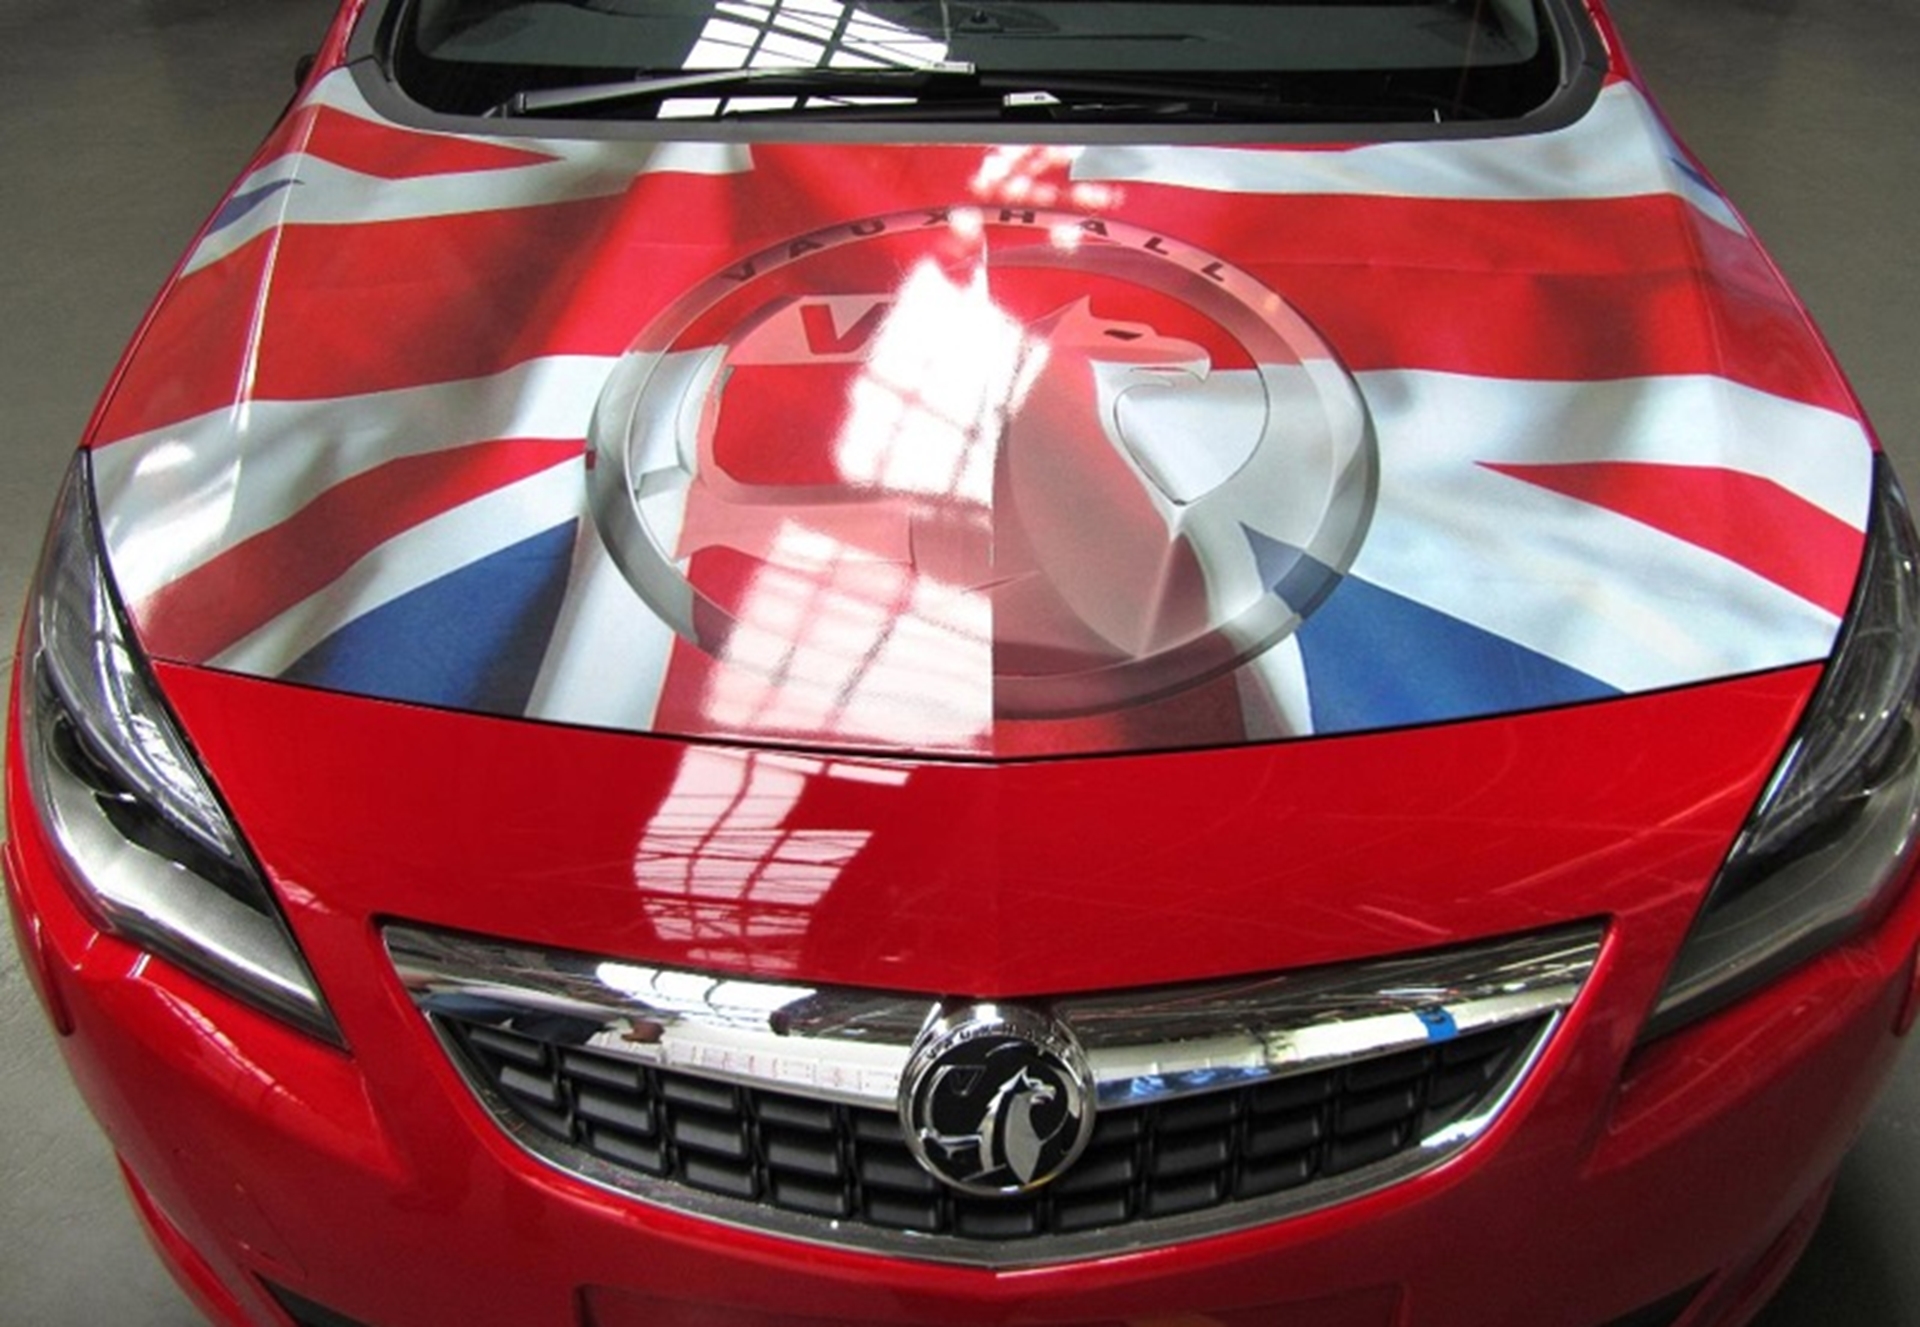 VAUXHALL TO BUILD NEXT-GENERATION ASTRA AT ELLESMERE PORT